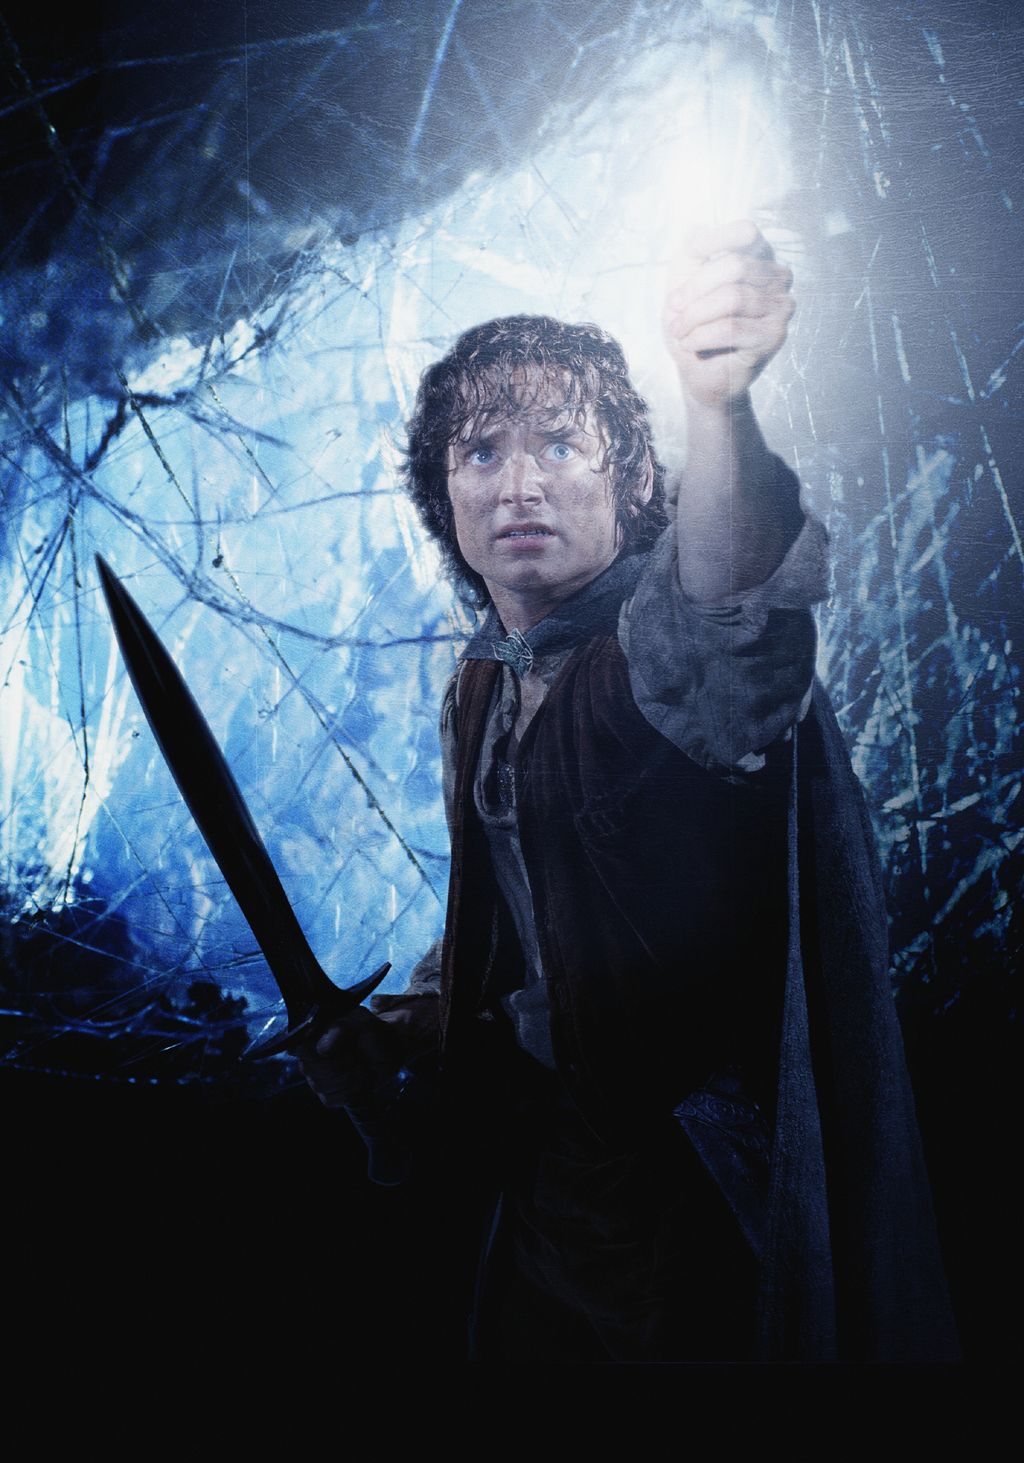 Happy 36th birthday, Elijah Wood! Fact: He was the first person to join the Lord of the Rings fan club in 2001... 